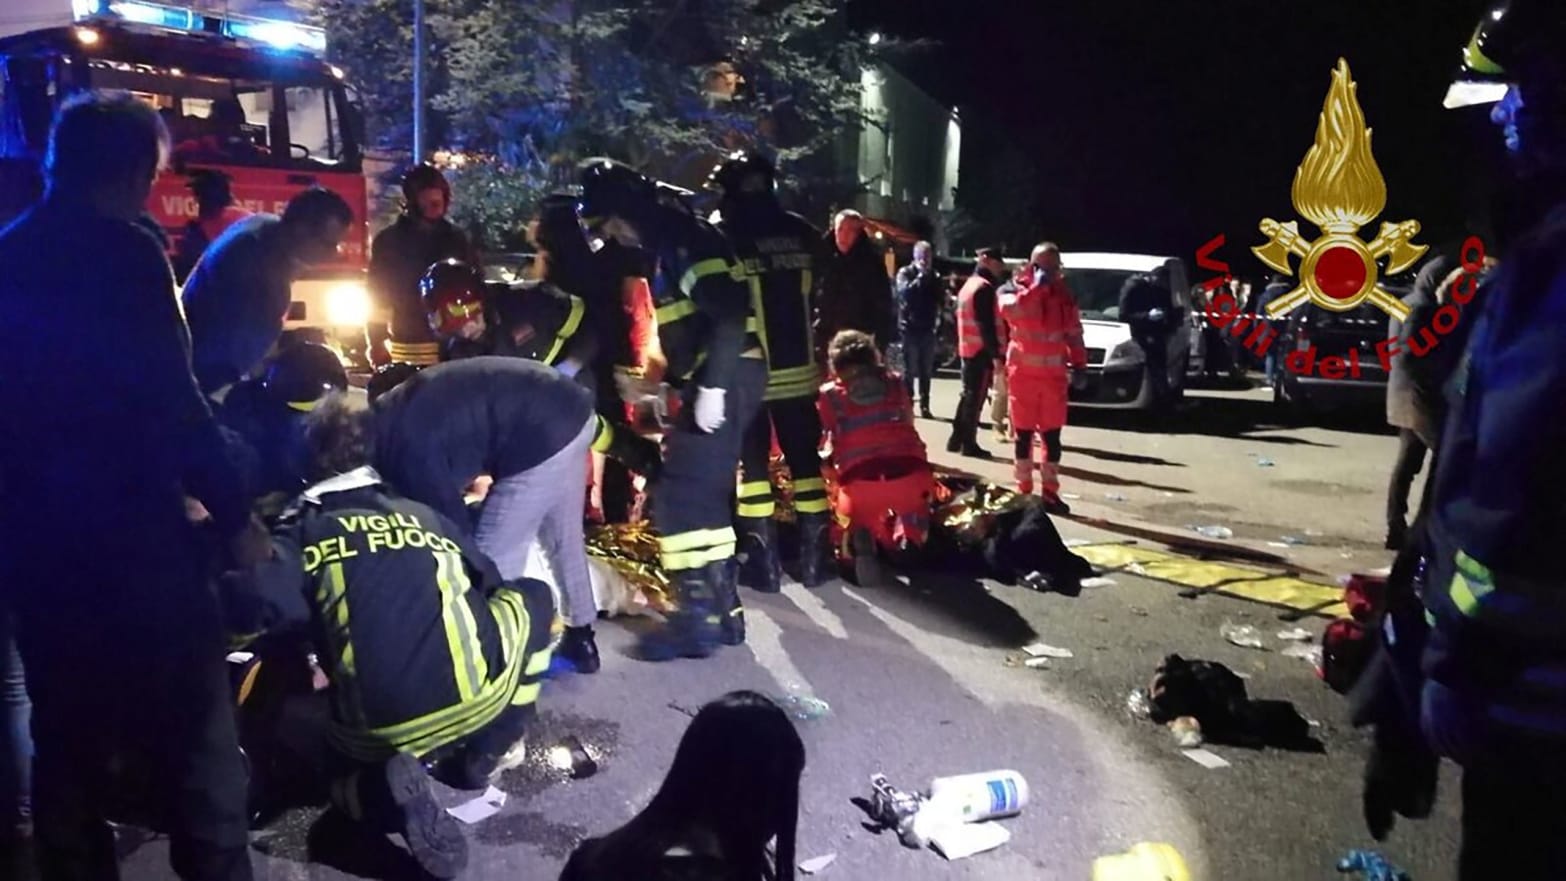 Several Teens Among The Dead After Stampede At Italian Rap Concert Featuring Sfera Ebbasta